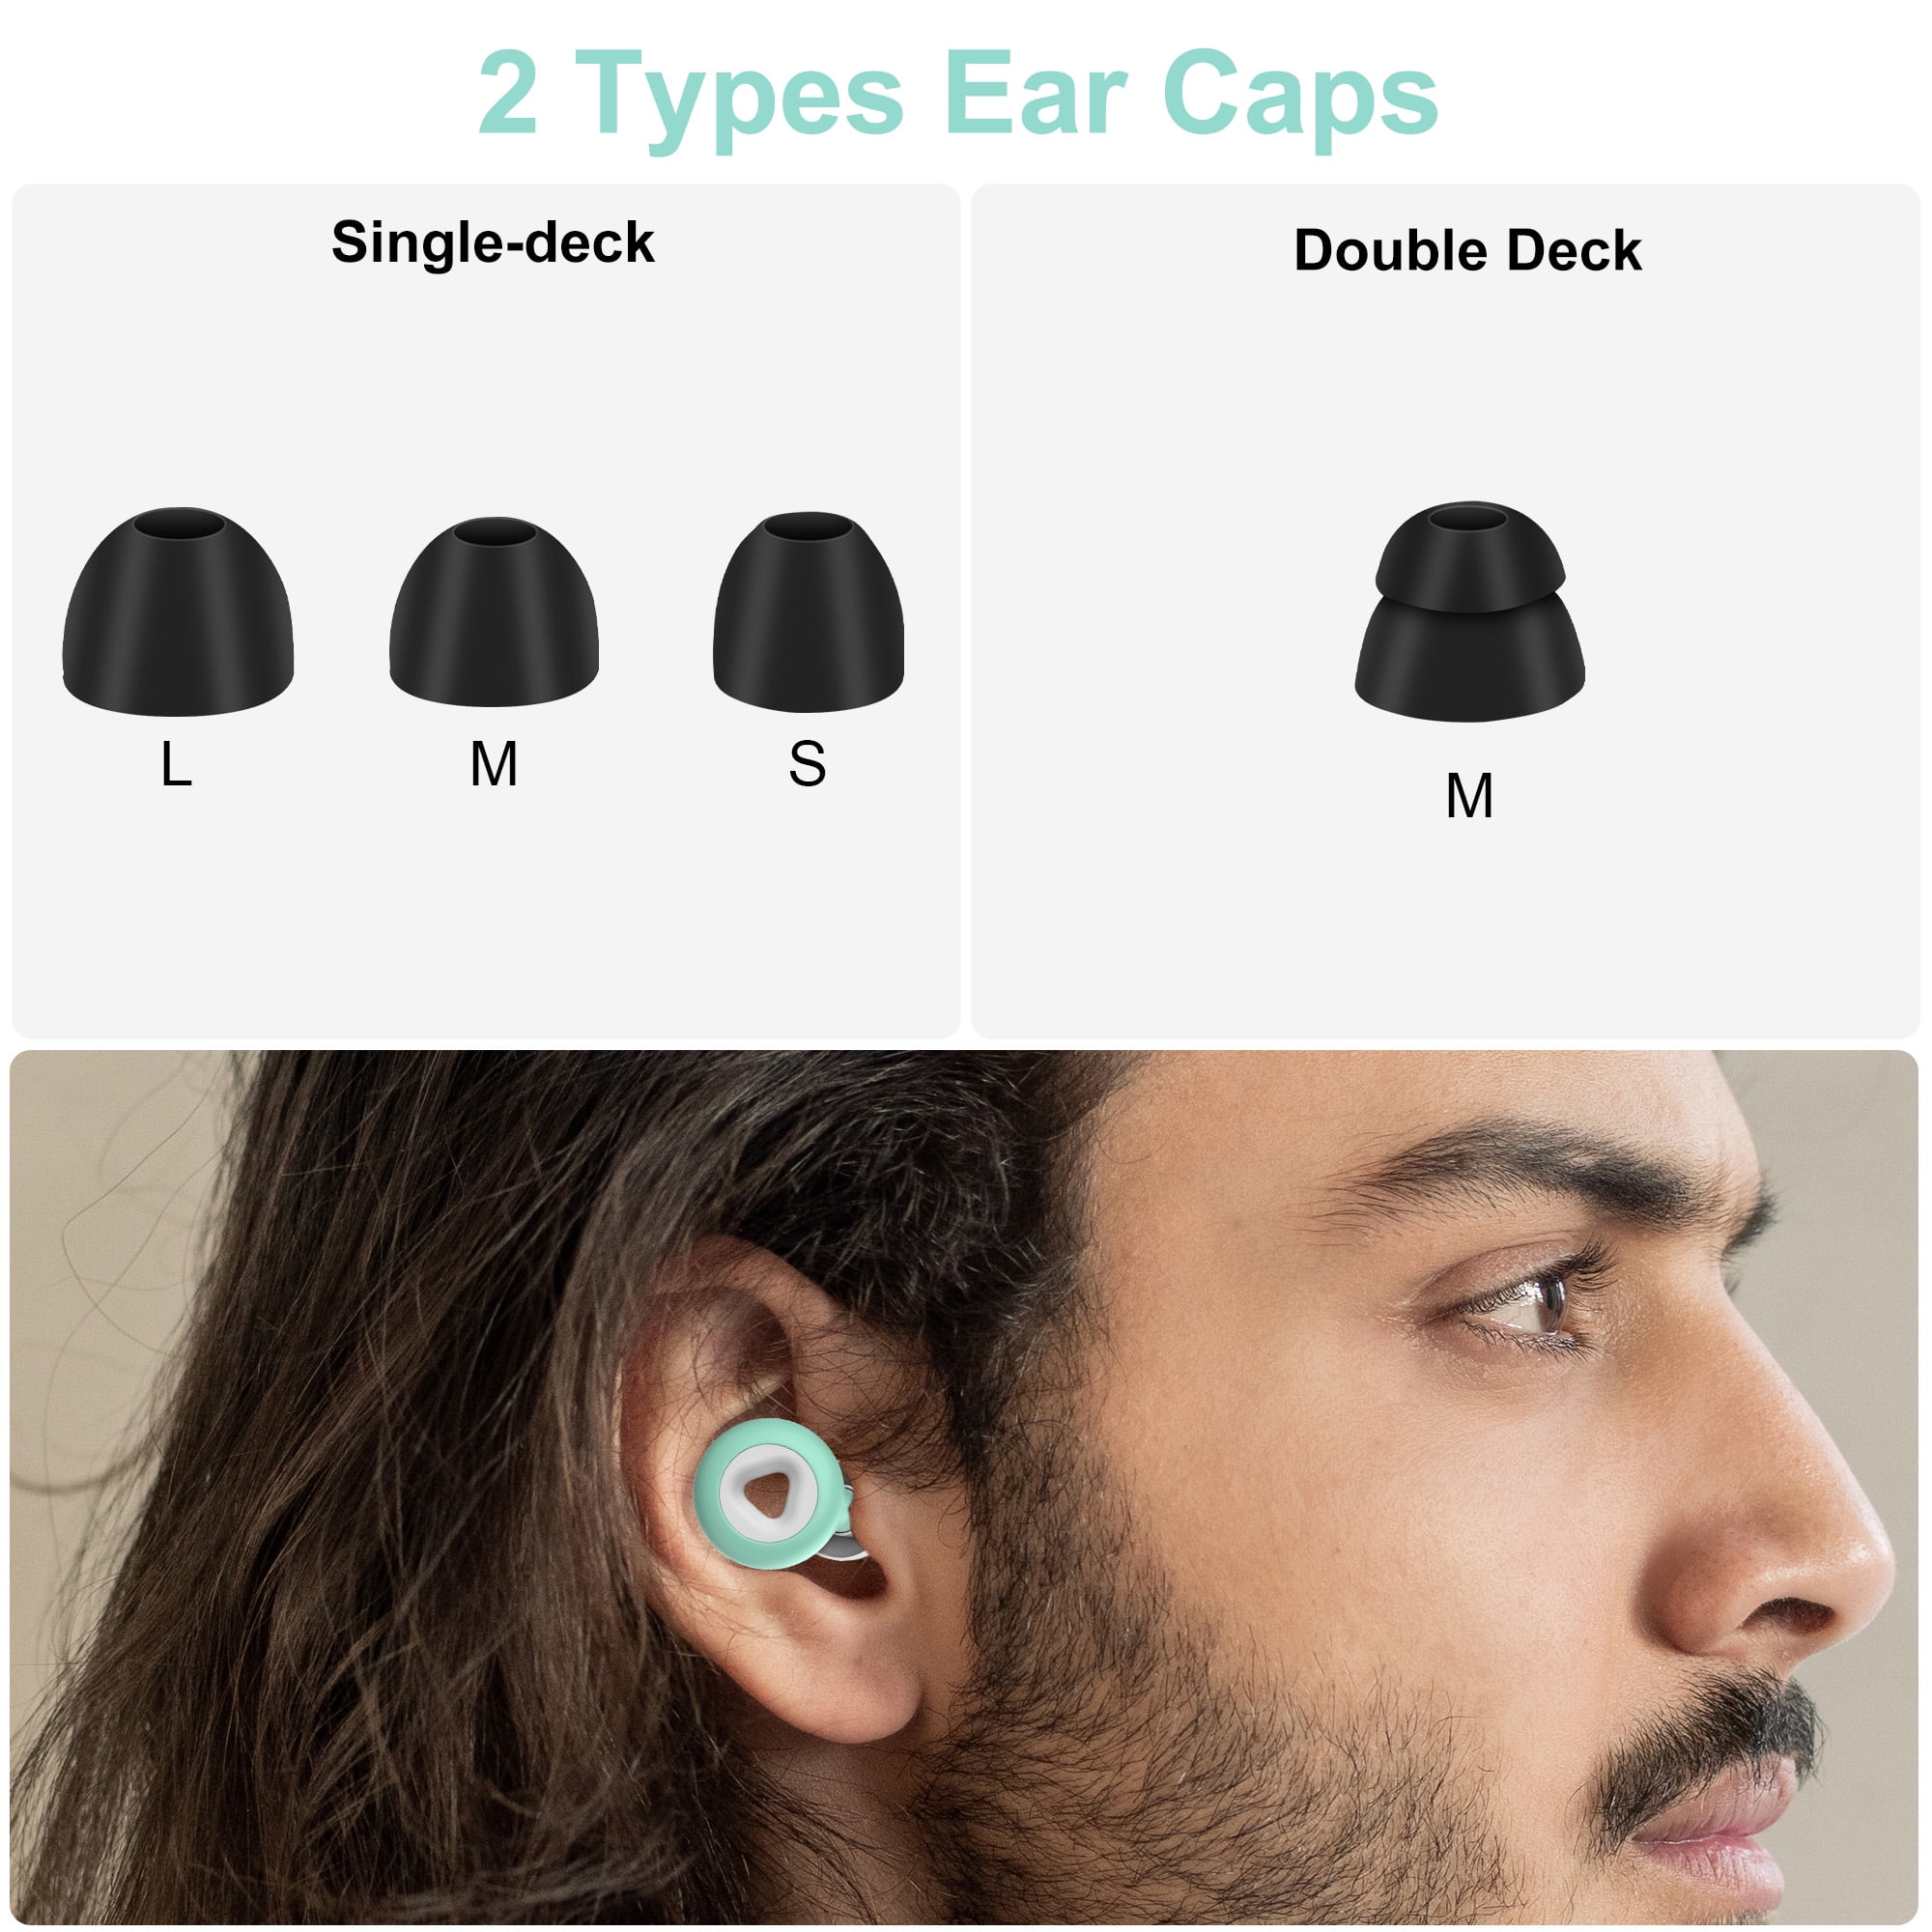  ZQuiet, Flex-Fit Earplugs, Noise Reduction Earplugs for Sleep,  Work, Concerts & Travel, Includes 2 Sizes, Premium Gift Box & Storage Case  : Health & Household